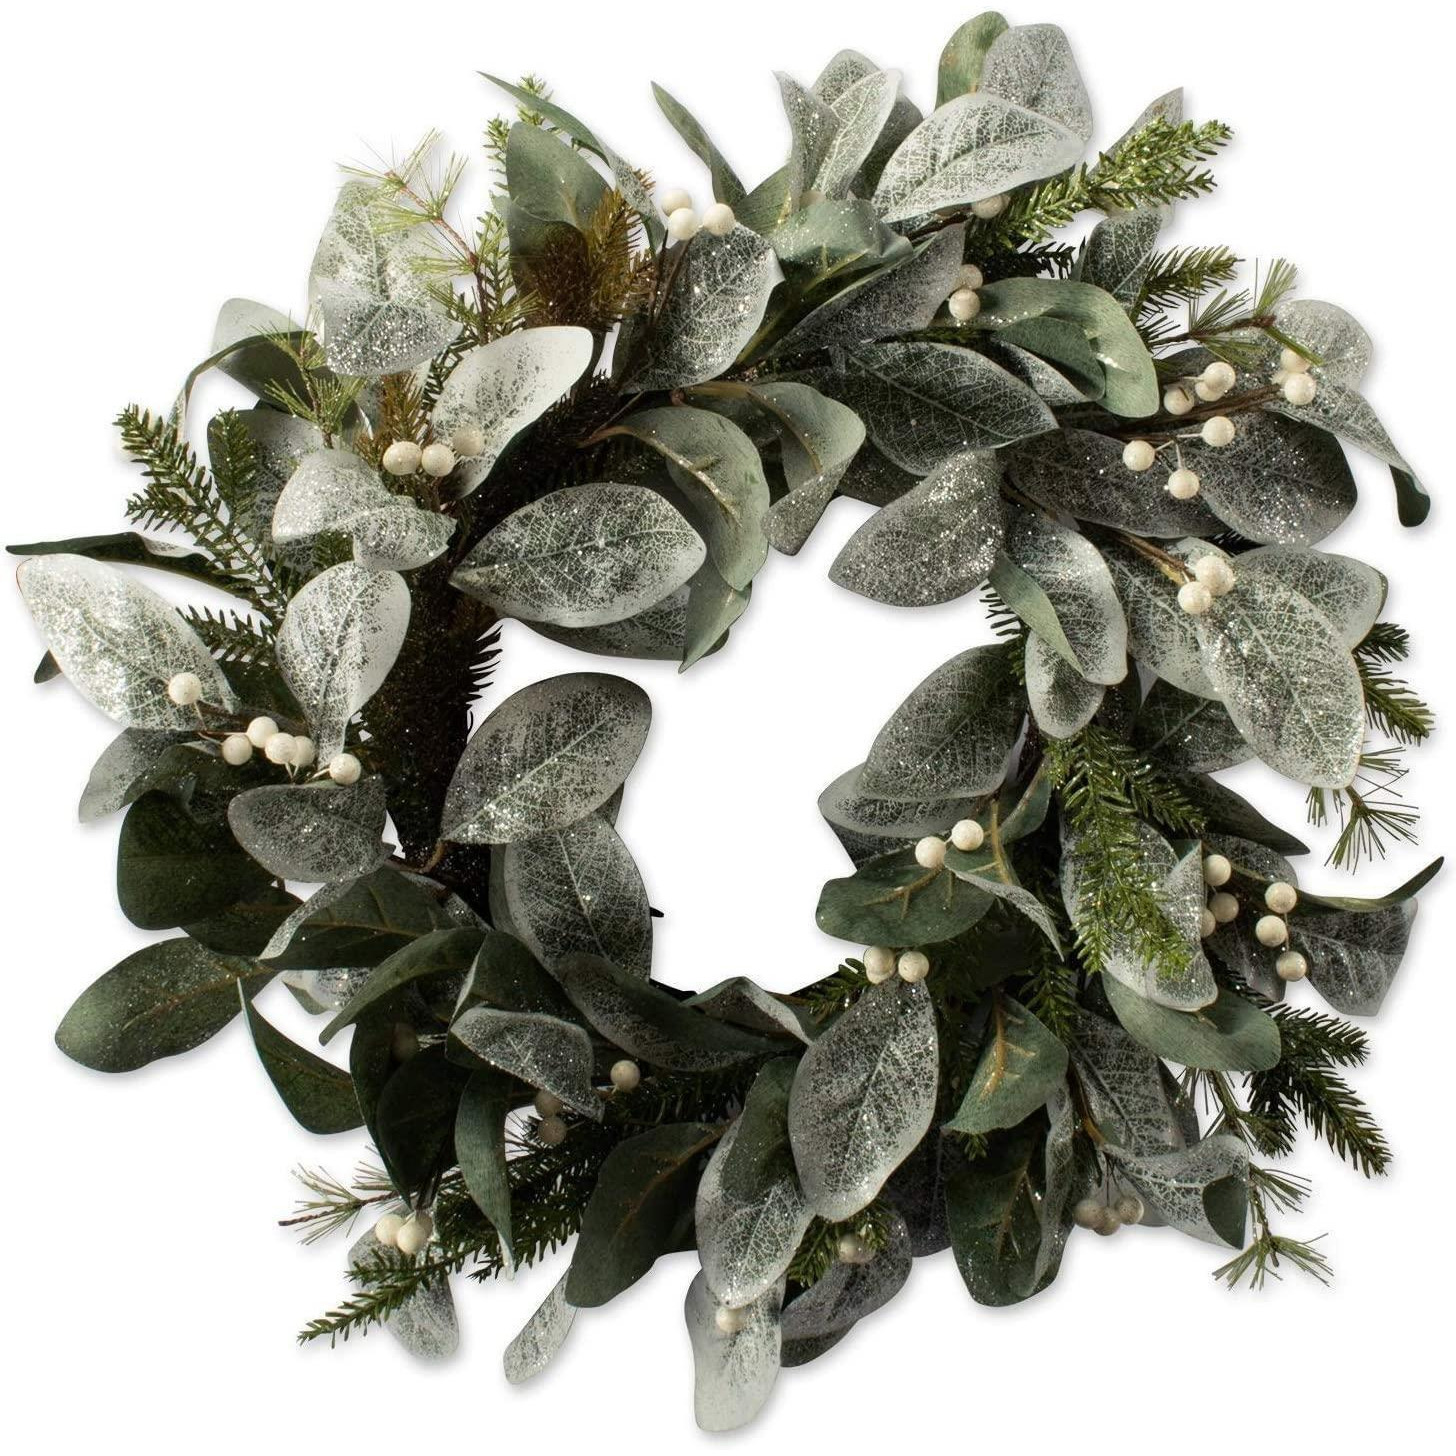 55cm Natural Looking Artificial Snowy Leaves, White Berries and Glittered Flowers Wreath Front Door Hanging Christmas Wedd - image 1